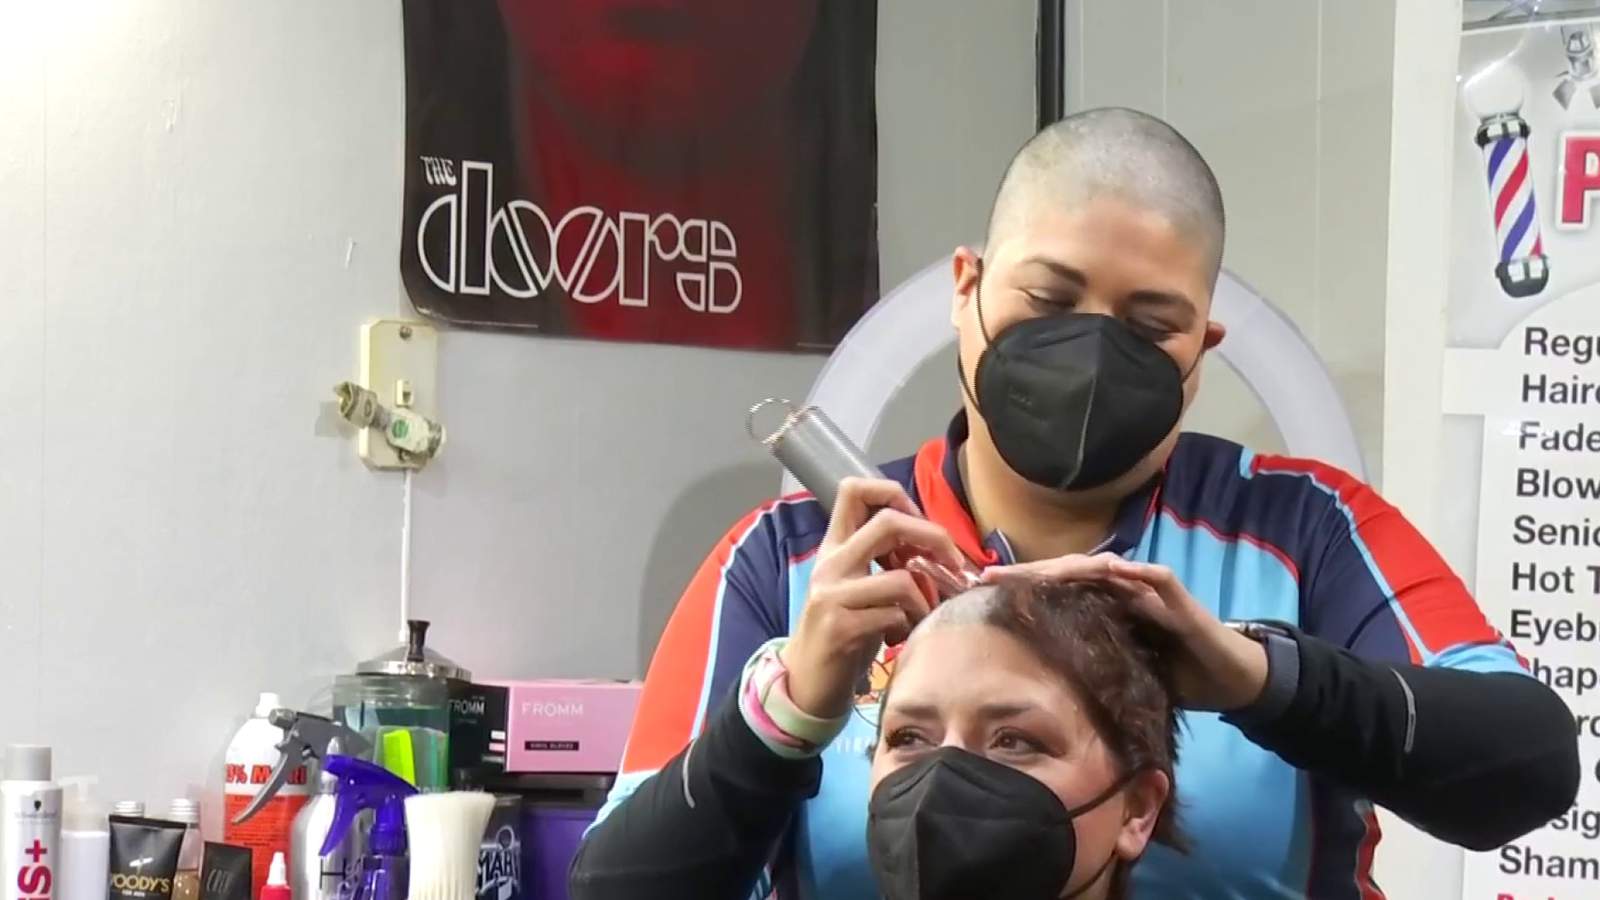 Women raise $11K for Roanoke Hospitality House by shaving heads for friend with cancer